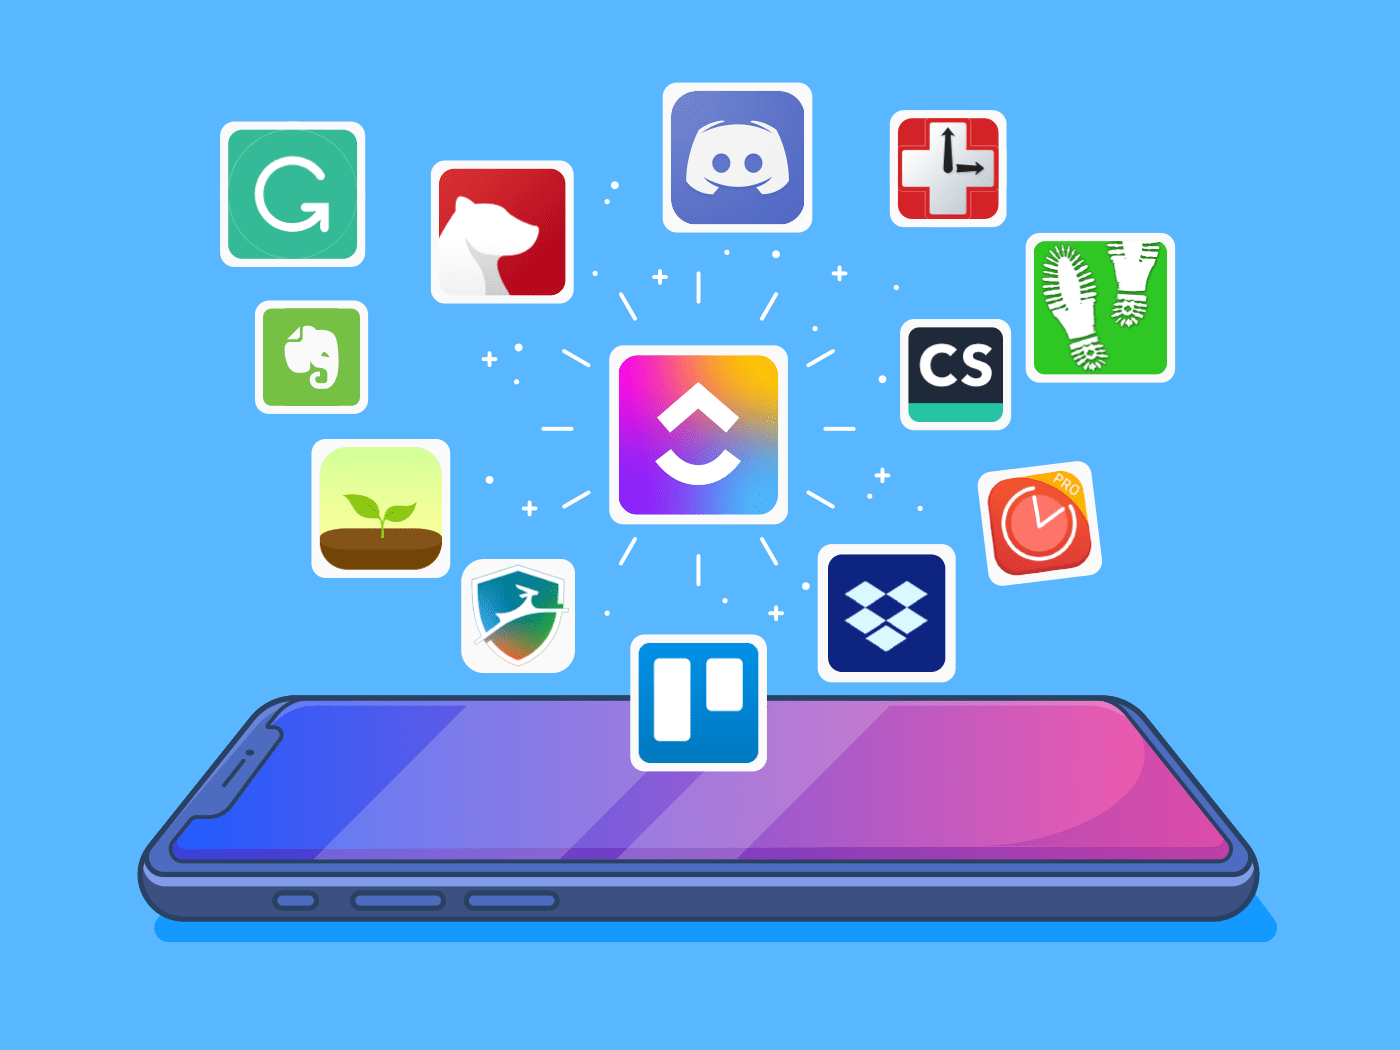 What Are the Best Apps for Productivity?